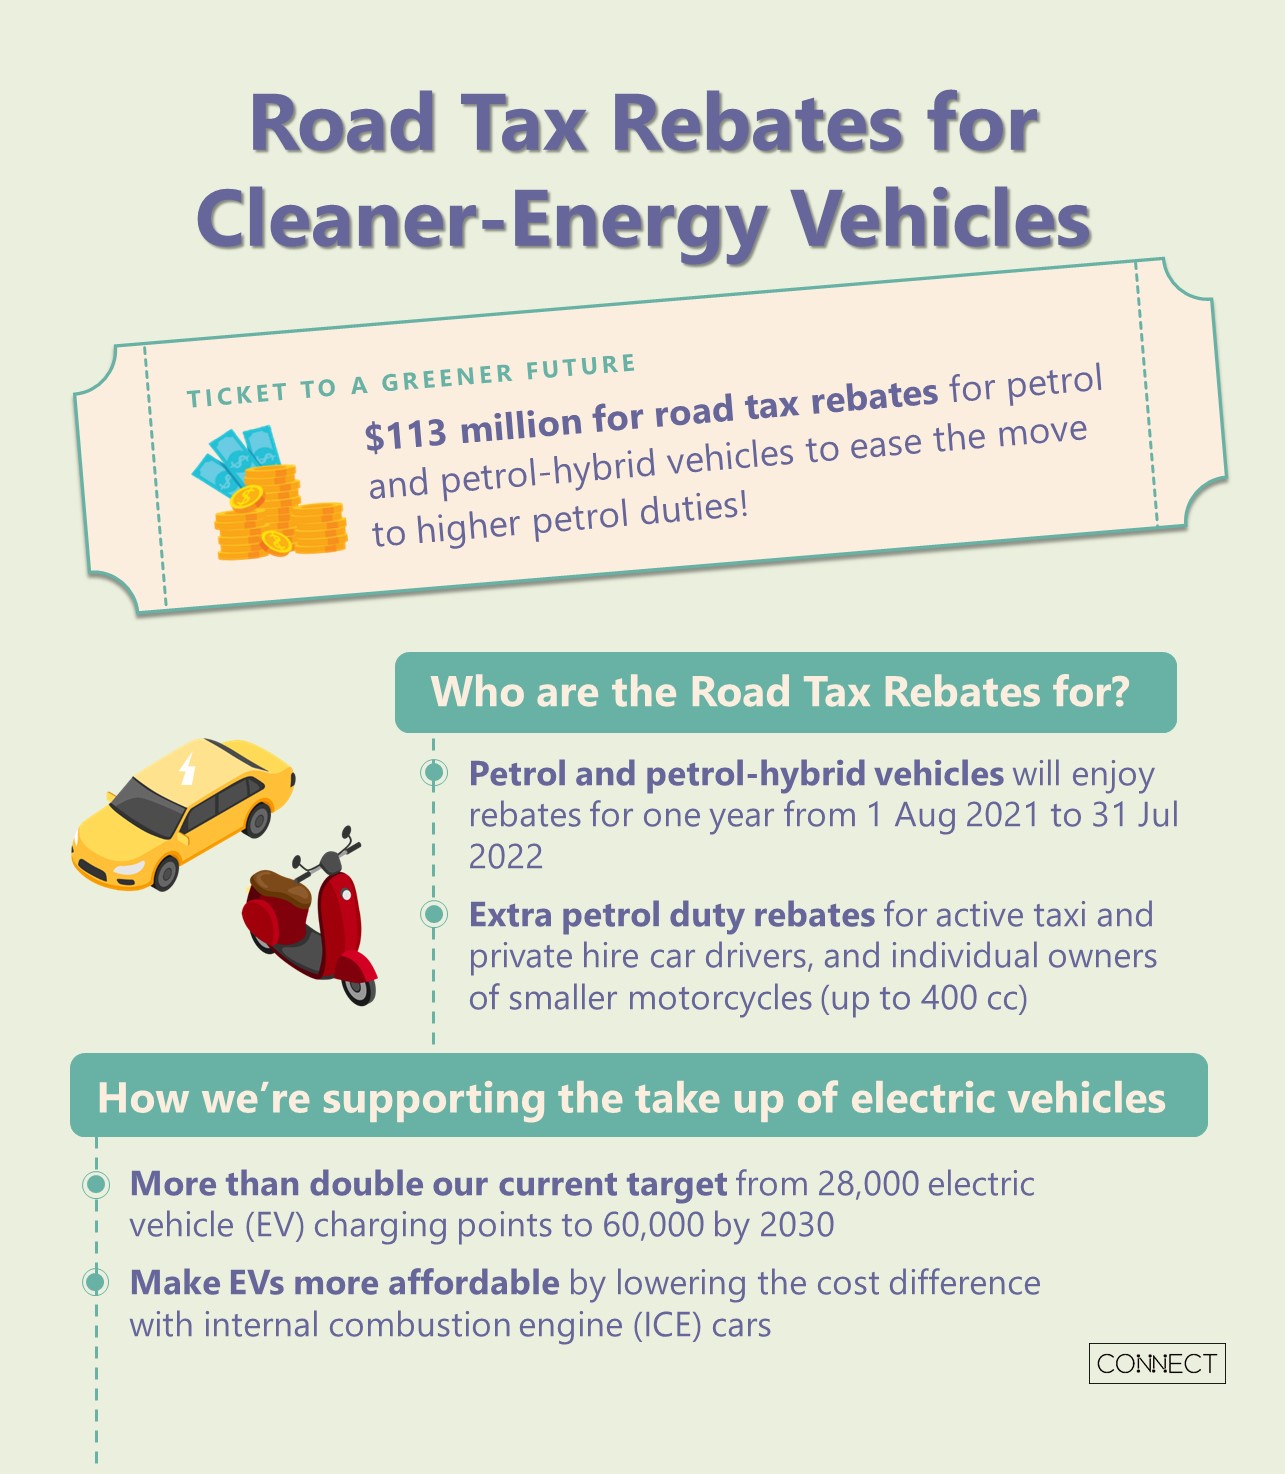 council-tax-rebate-epping-forest-district-council